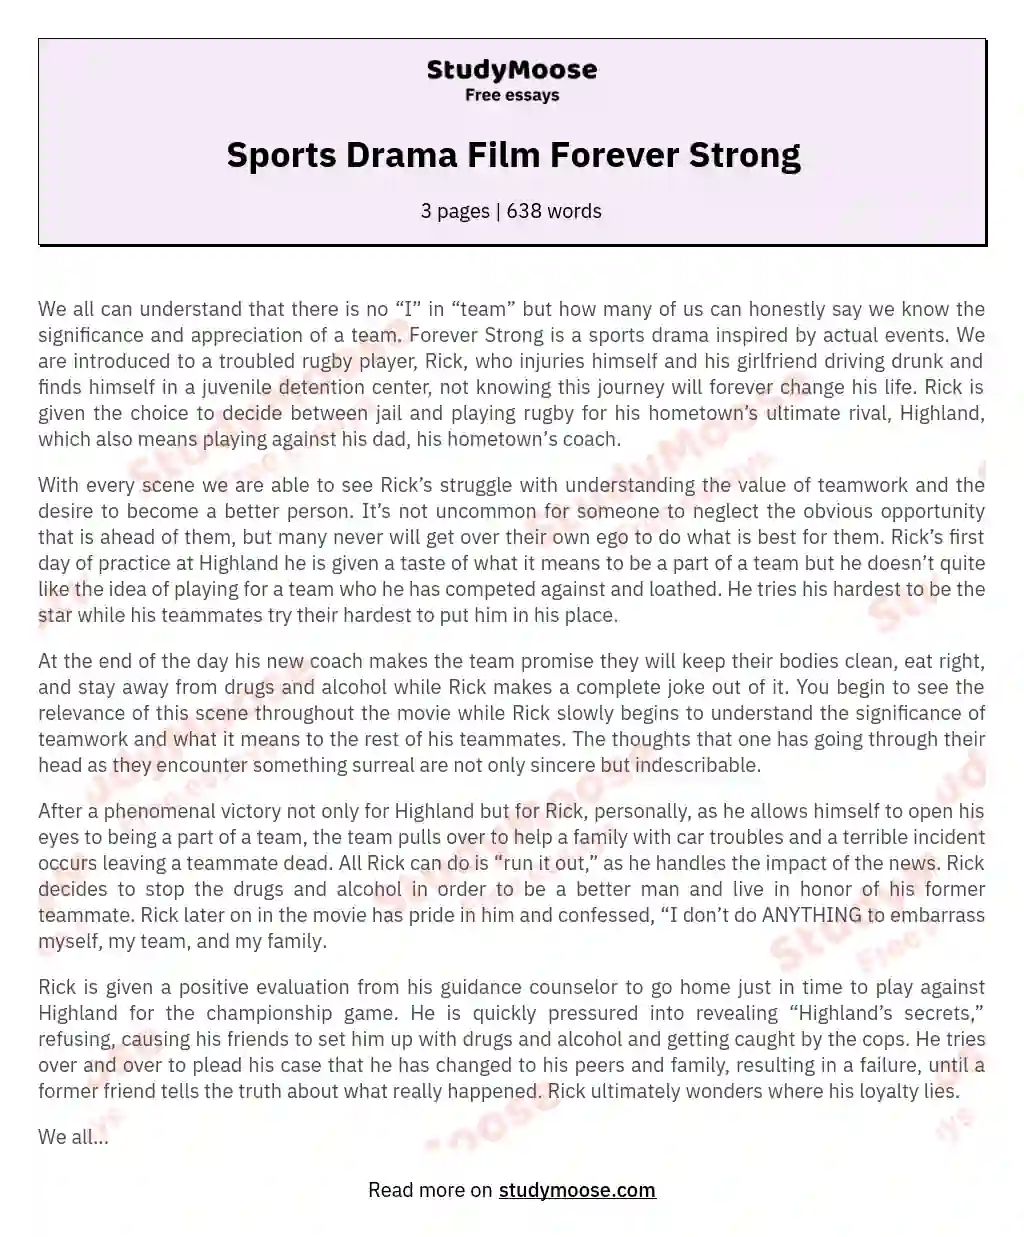 Sports Drama Film Forever Strong essay